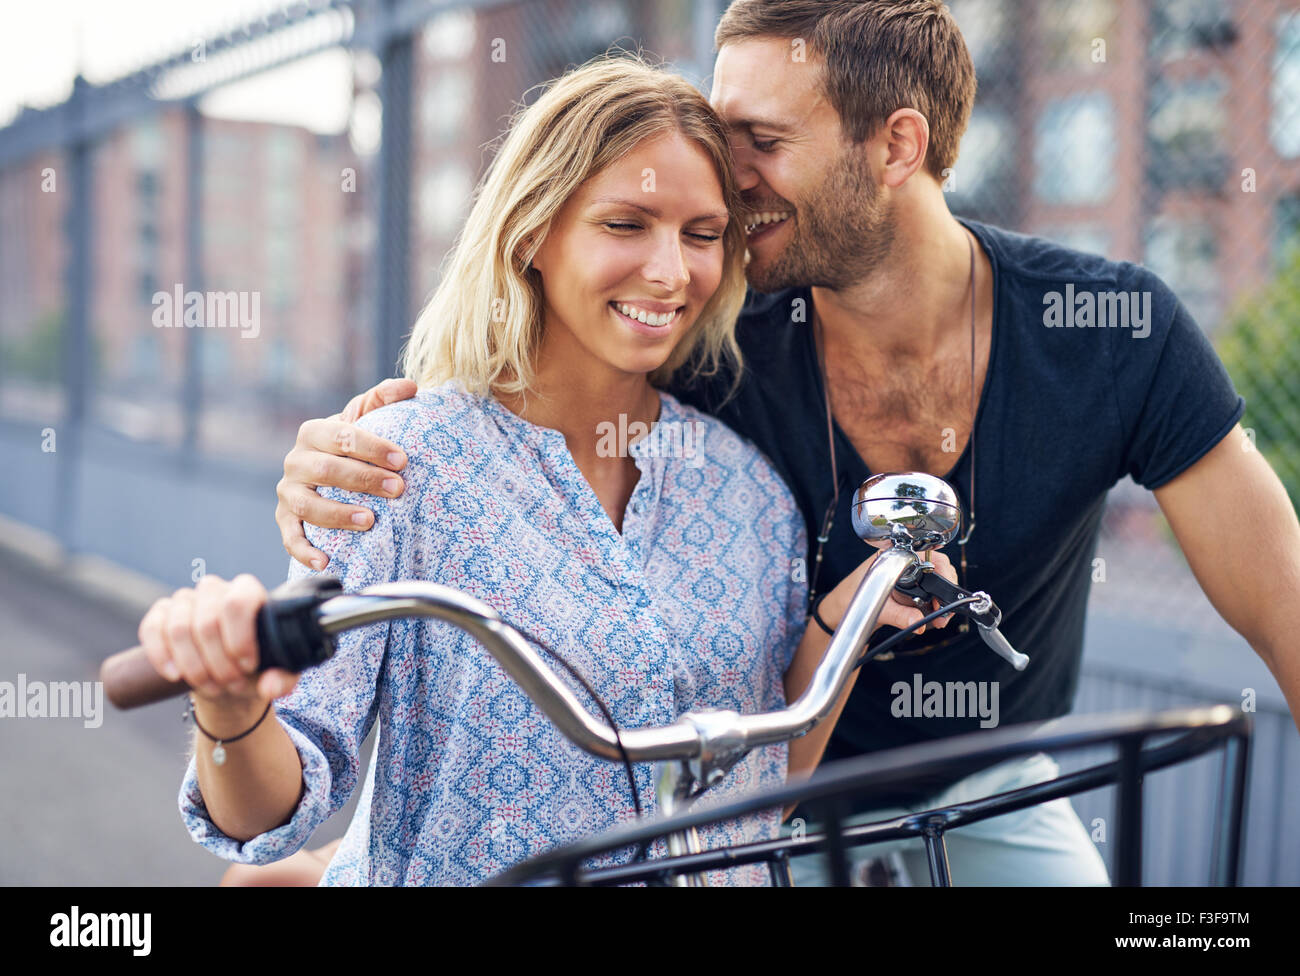 City couple loving each other while out riding bikes Stock Photo